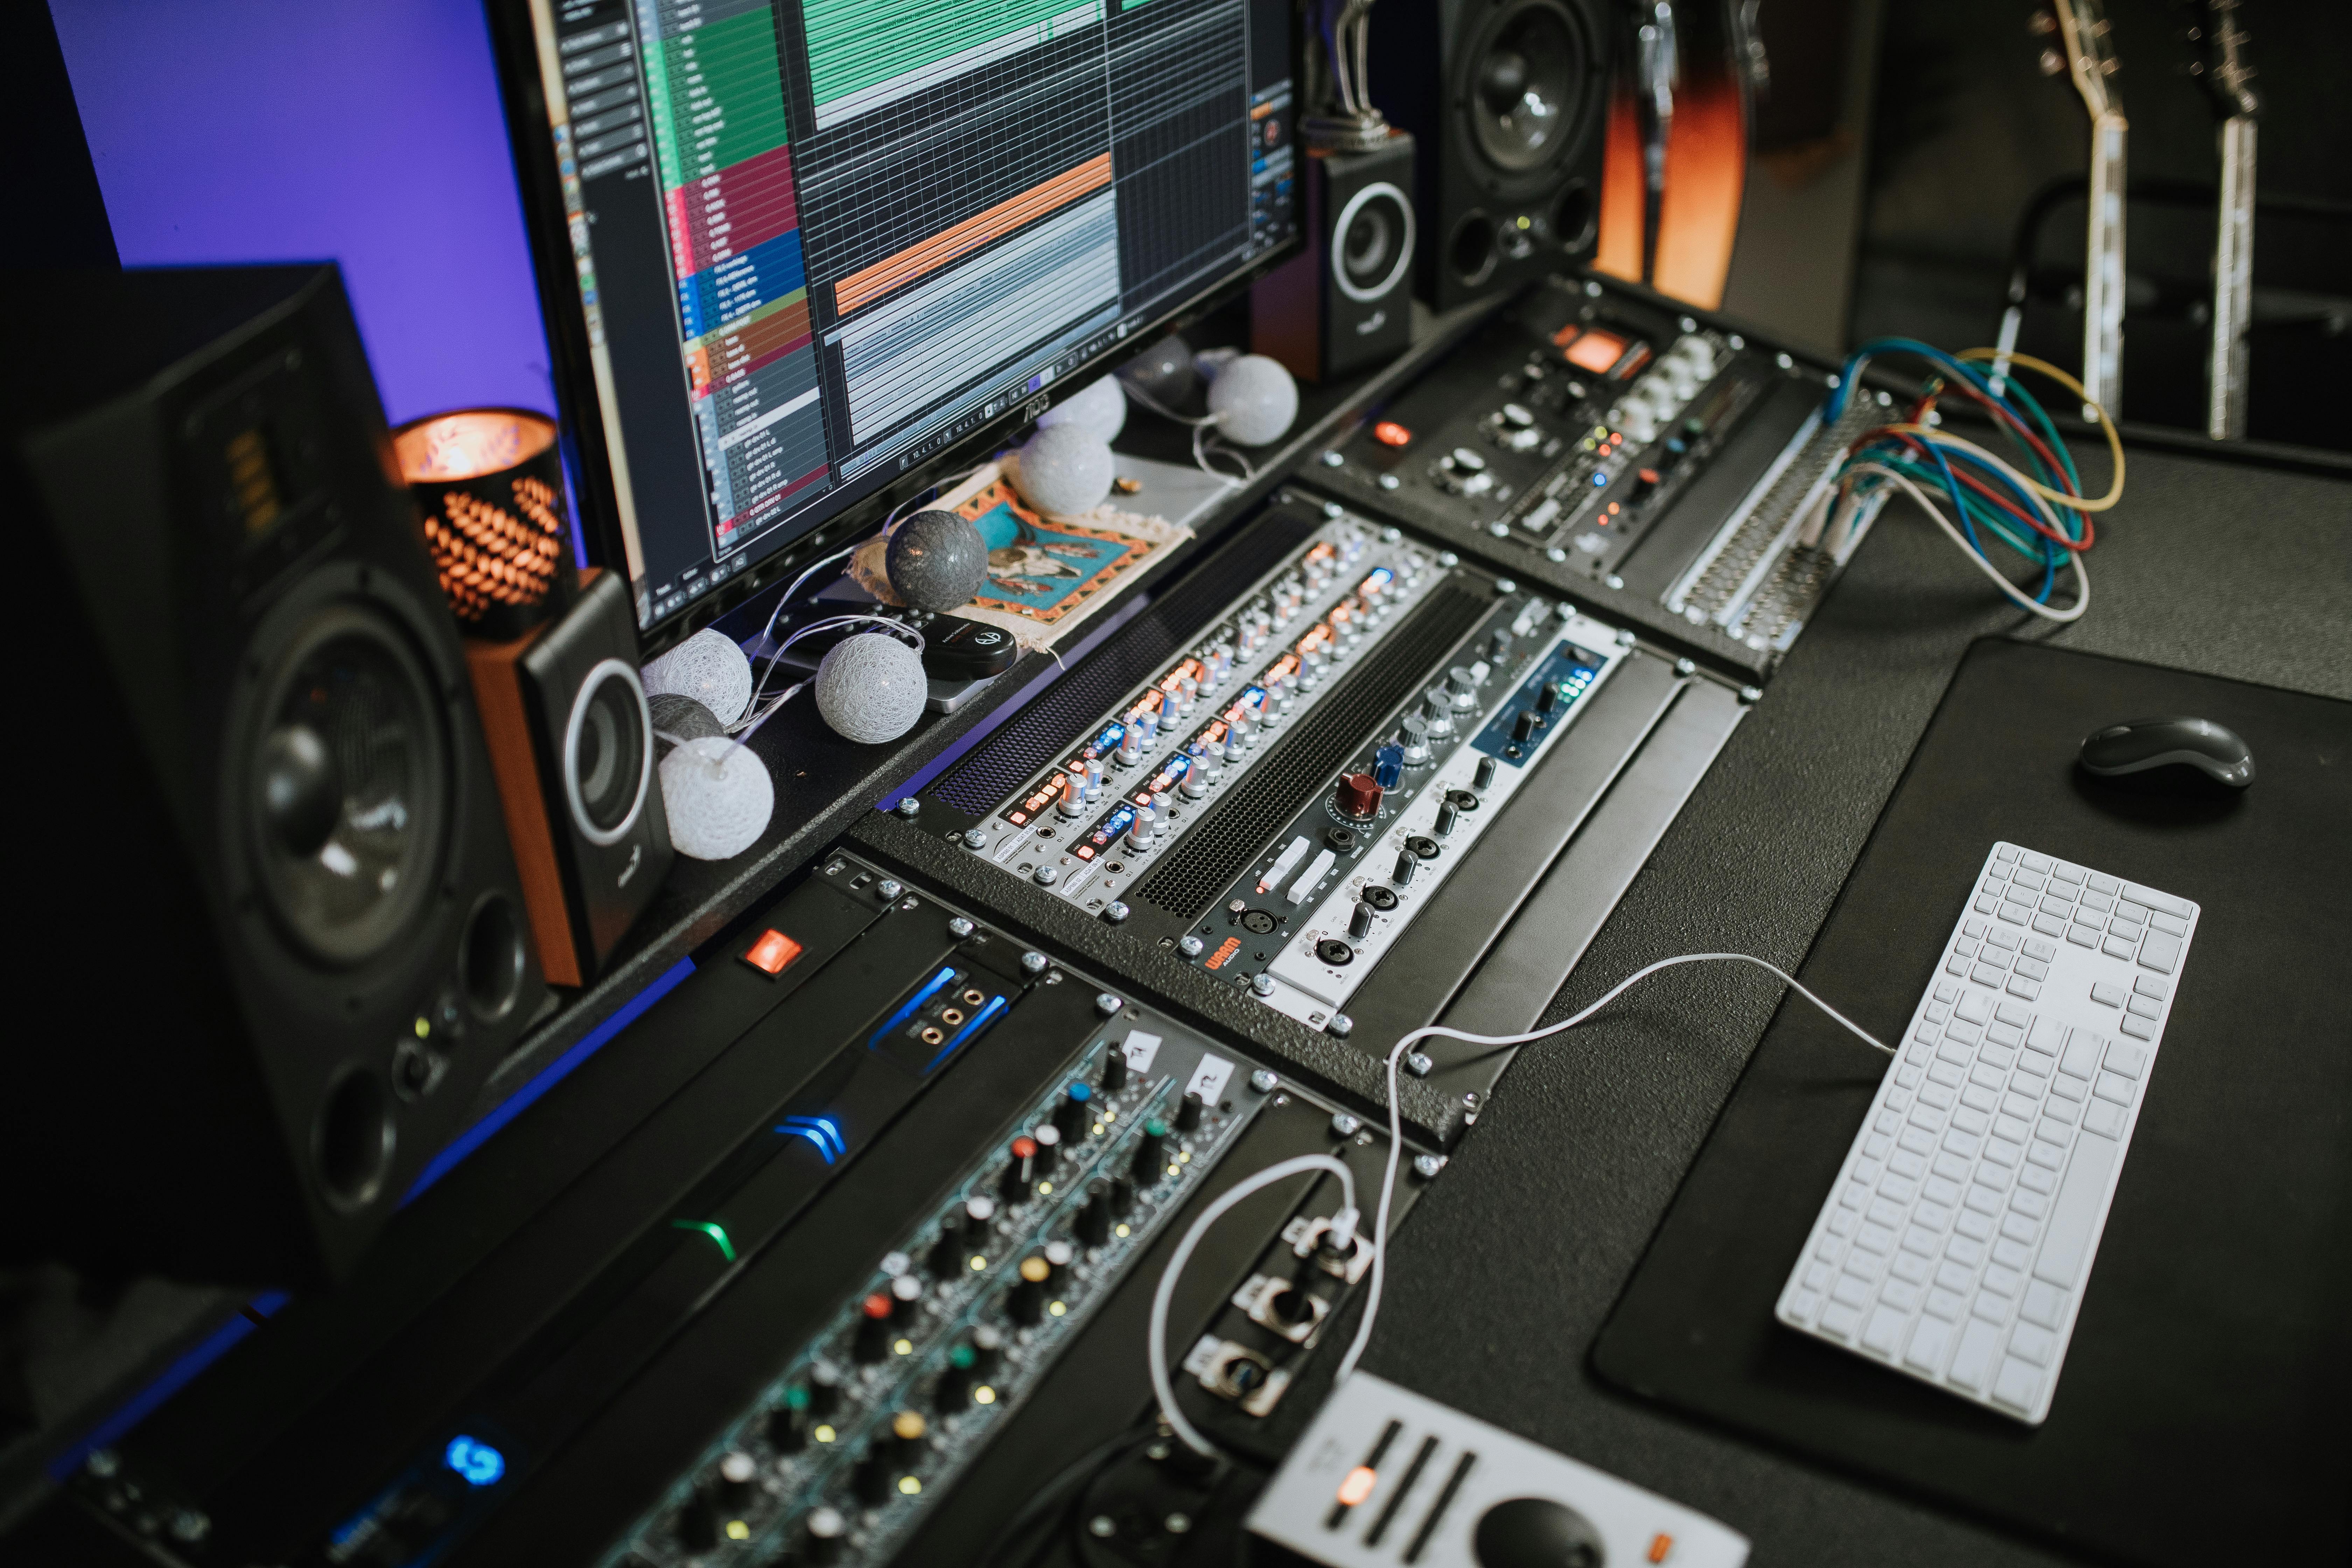 Powerful gear and mix console in this professional studio. By